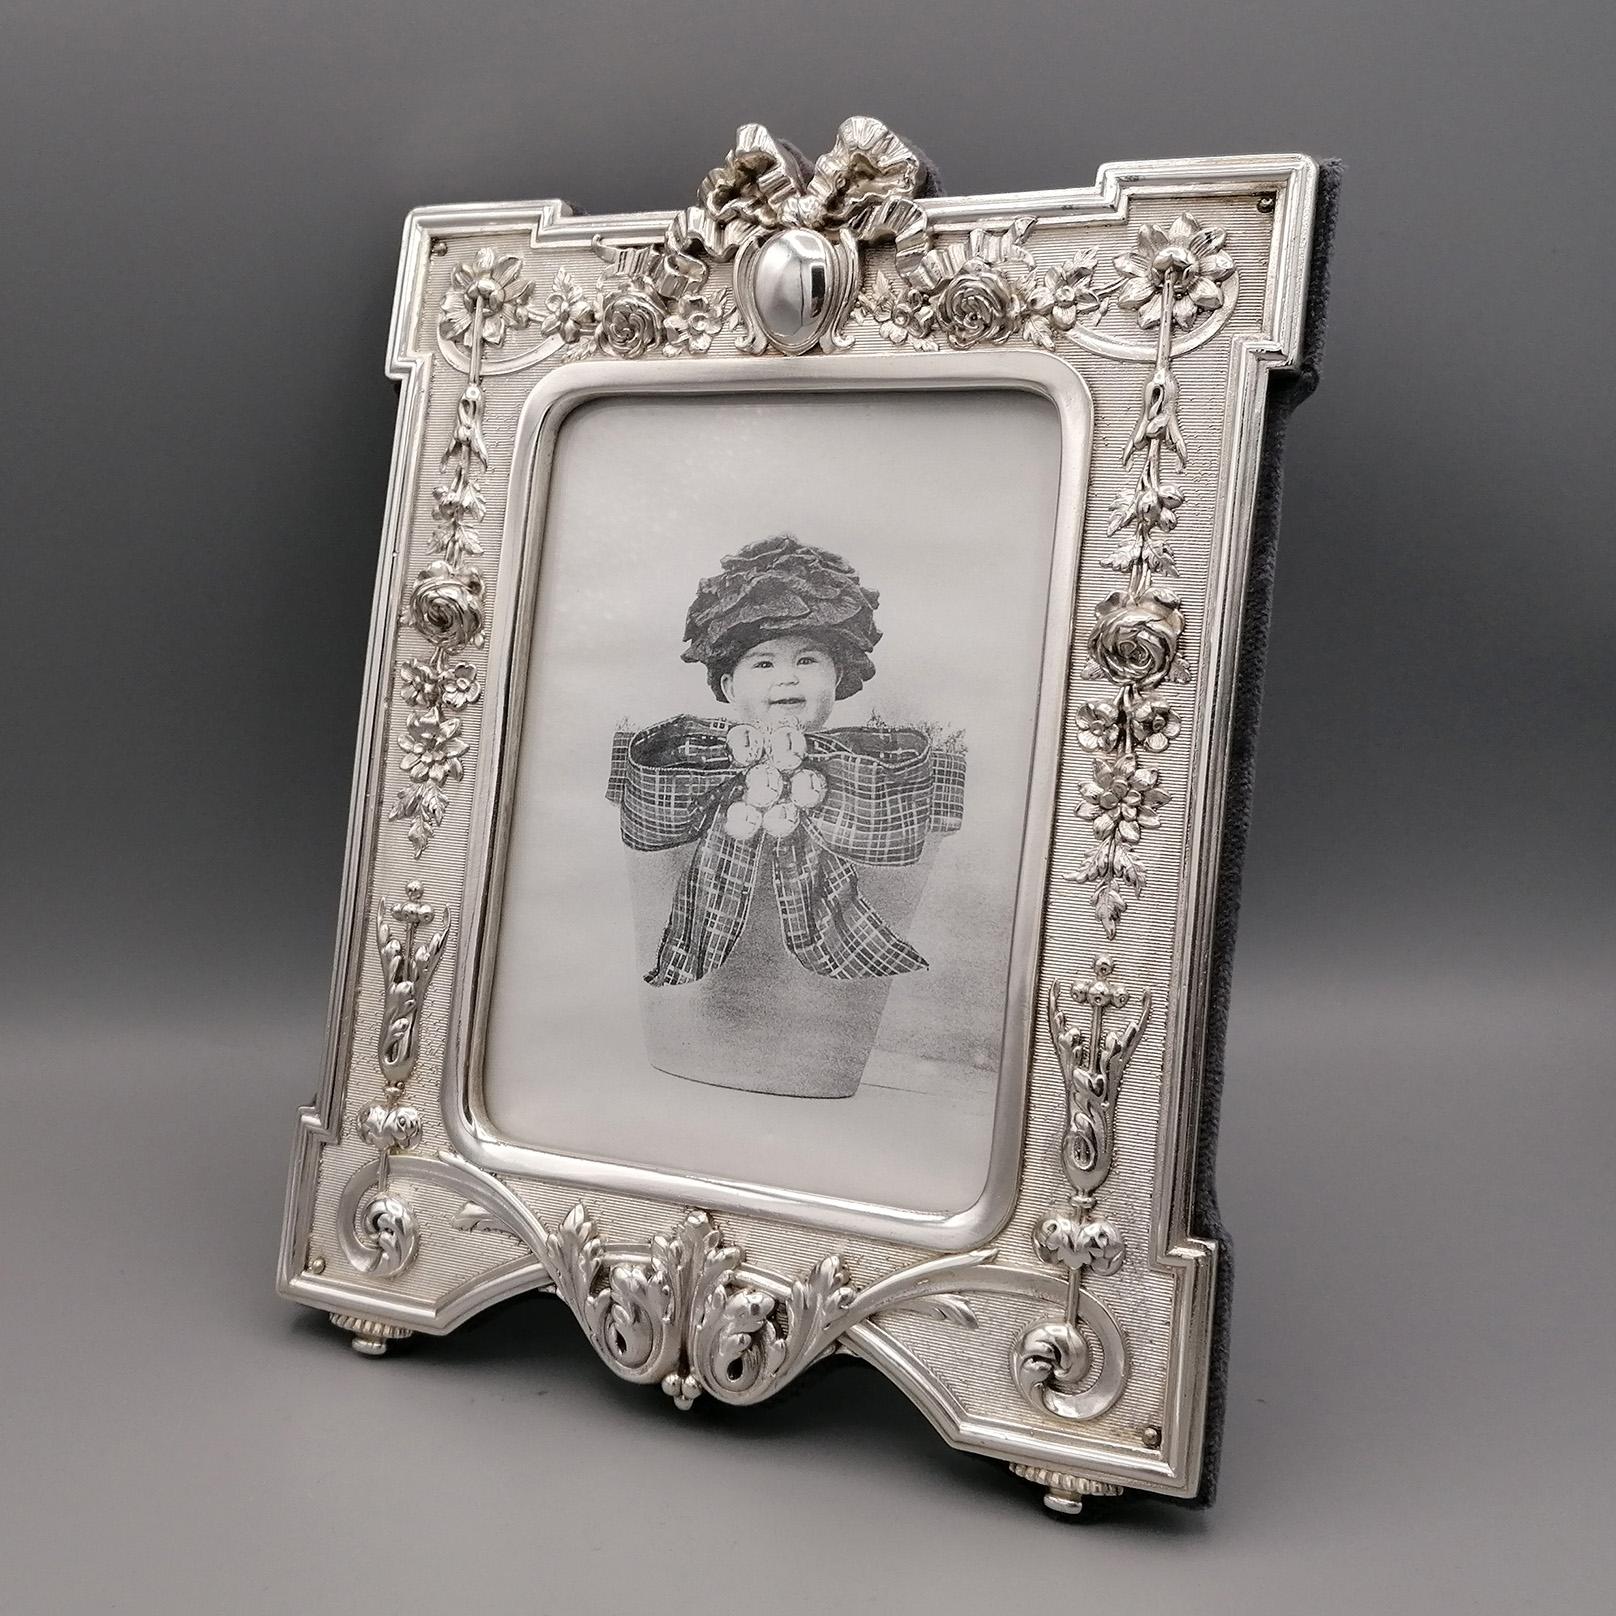 Sterling silver photo frame.
The frame was made in Italy by the Argenteria Raddi of Florence.
The design is typically Libeerty with the characteristic flowers, festoons and ribbons.
The shaped frame was striped against the background of the